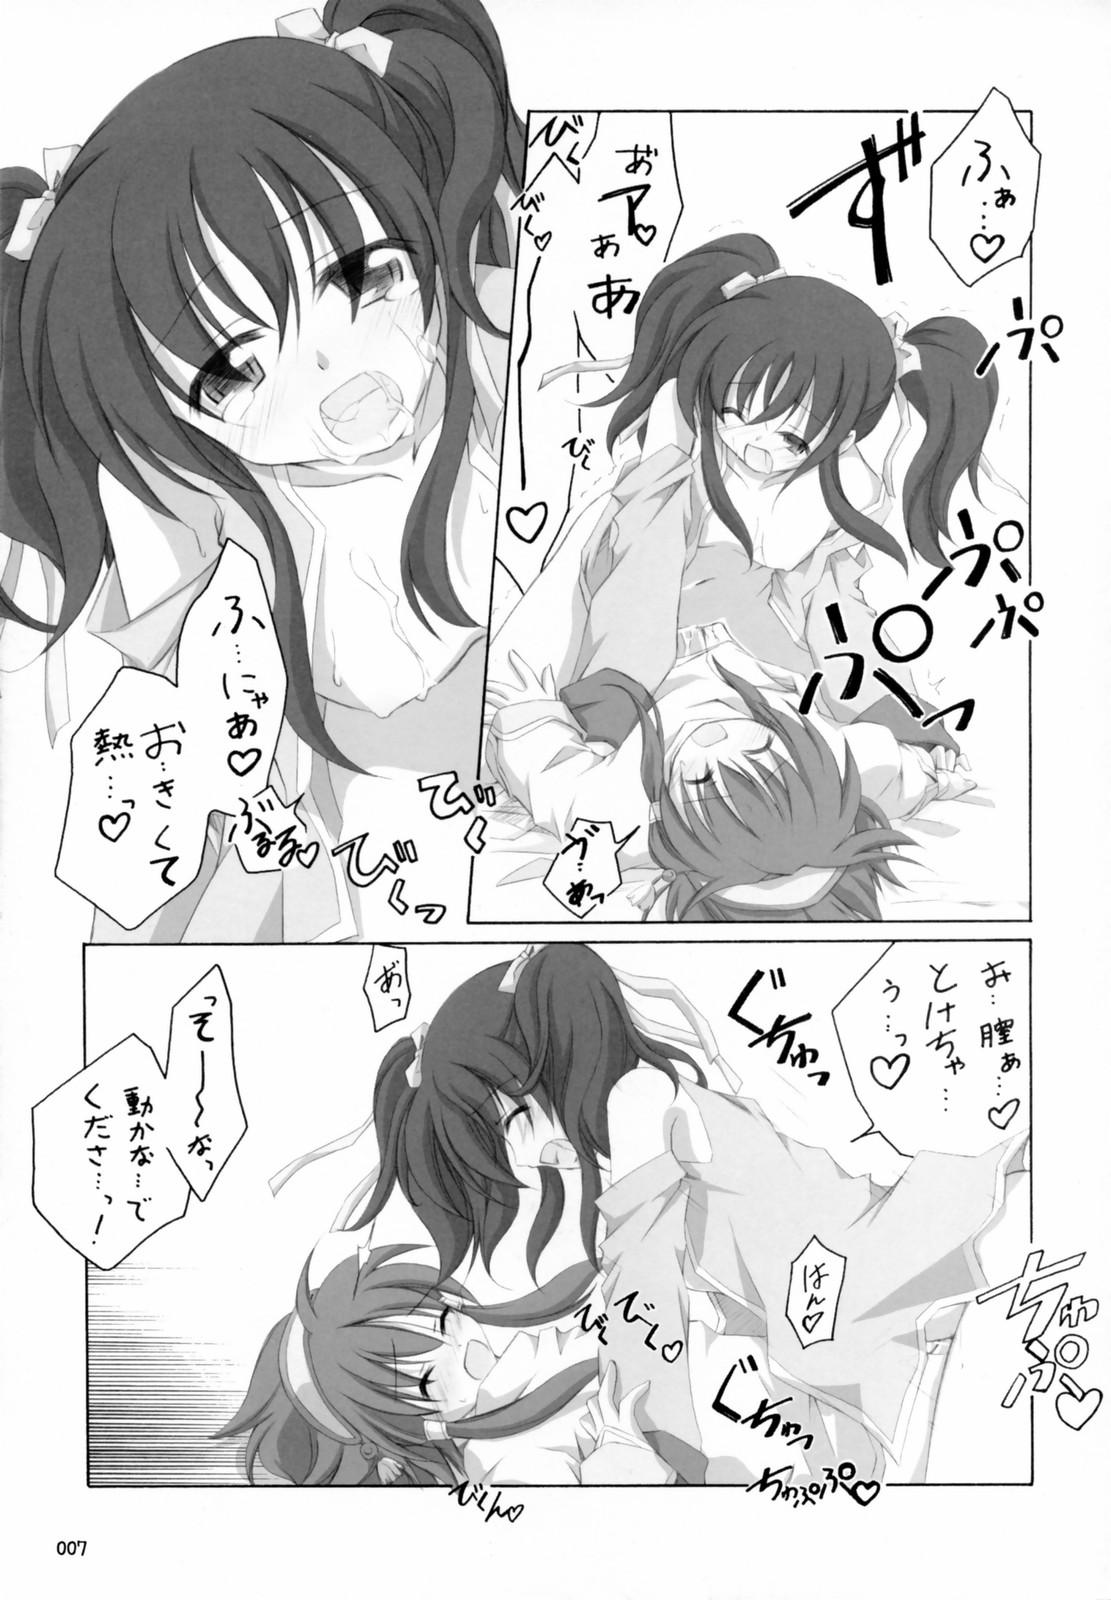 Best Blowjob Arushitei - Tales of the abyss Gay Boysporn - Page 6